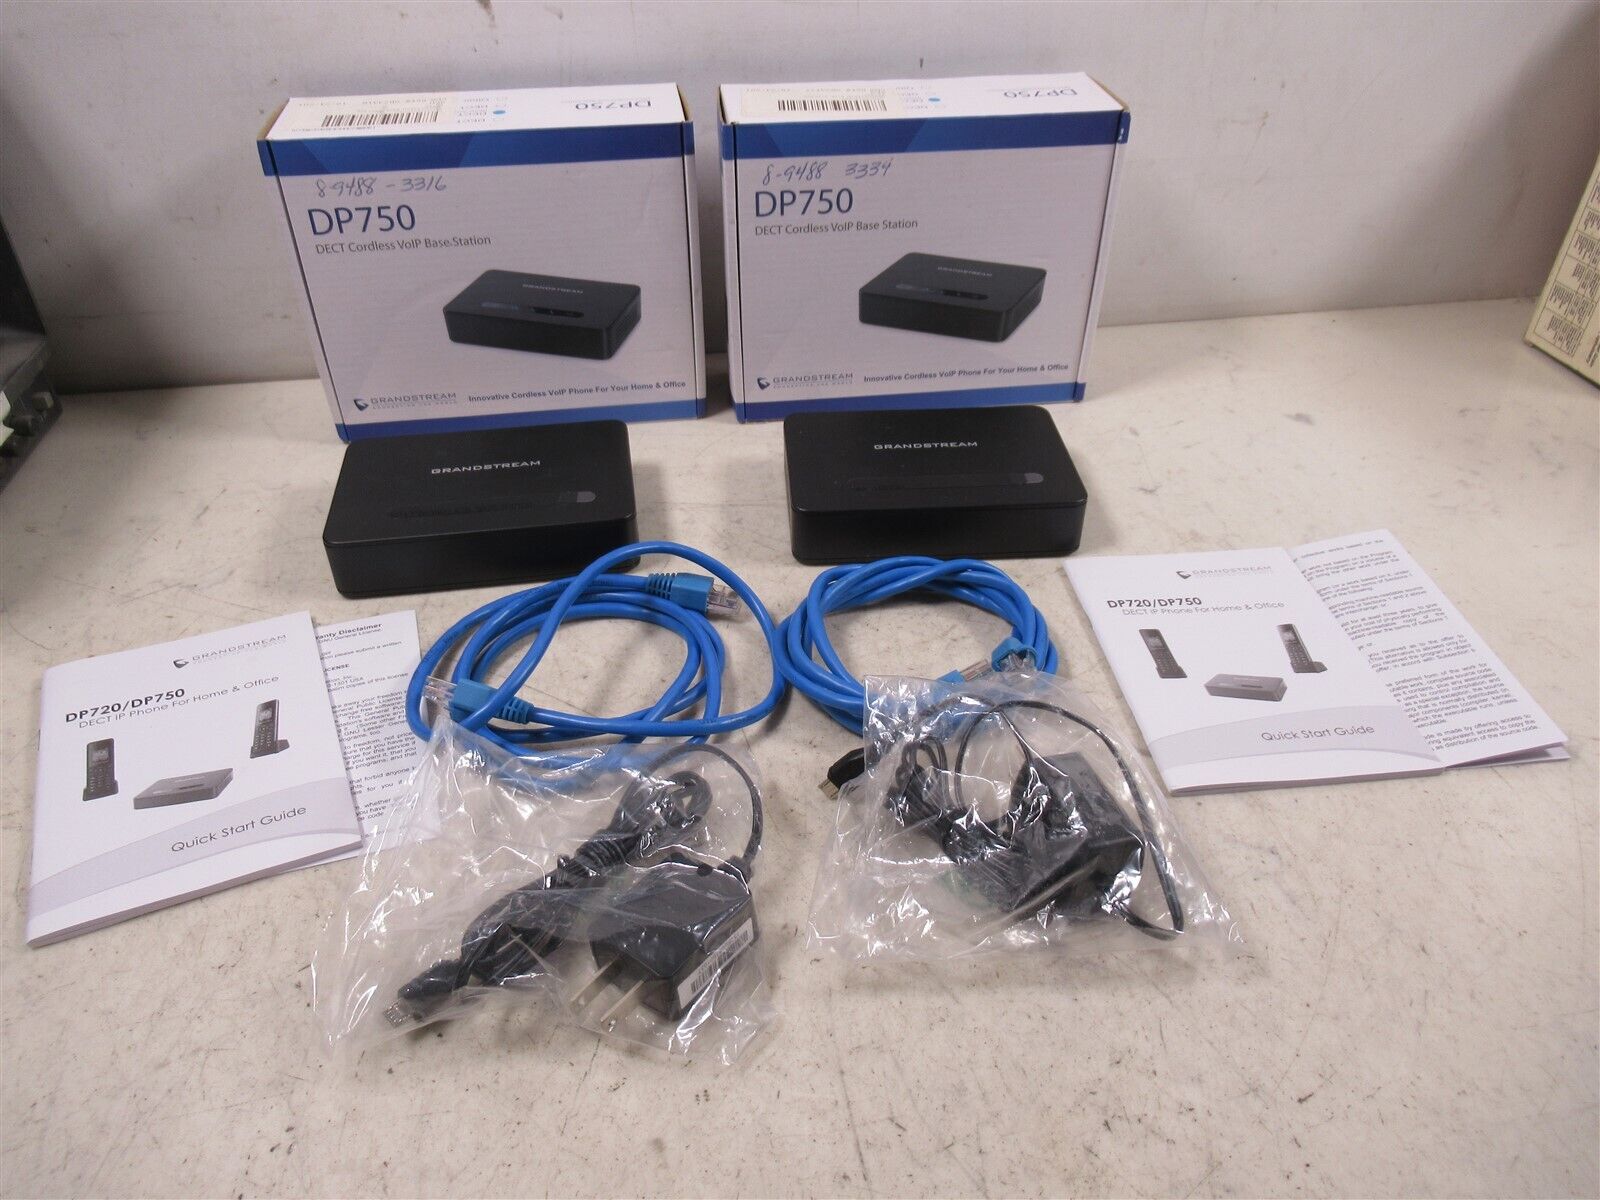 Lot of 2 Grandstream DP750 DECT Cordless VoIP BaseStation 3-Way Conferencing 